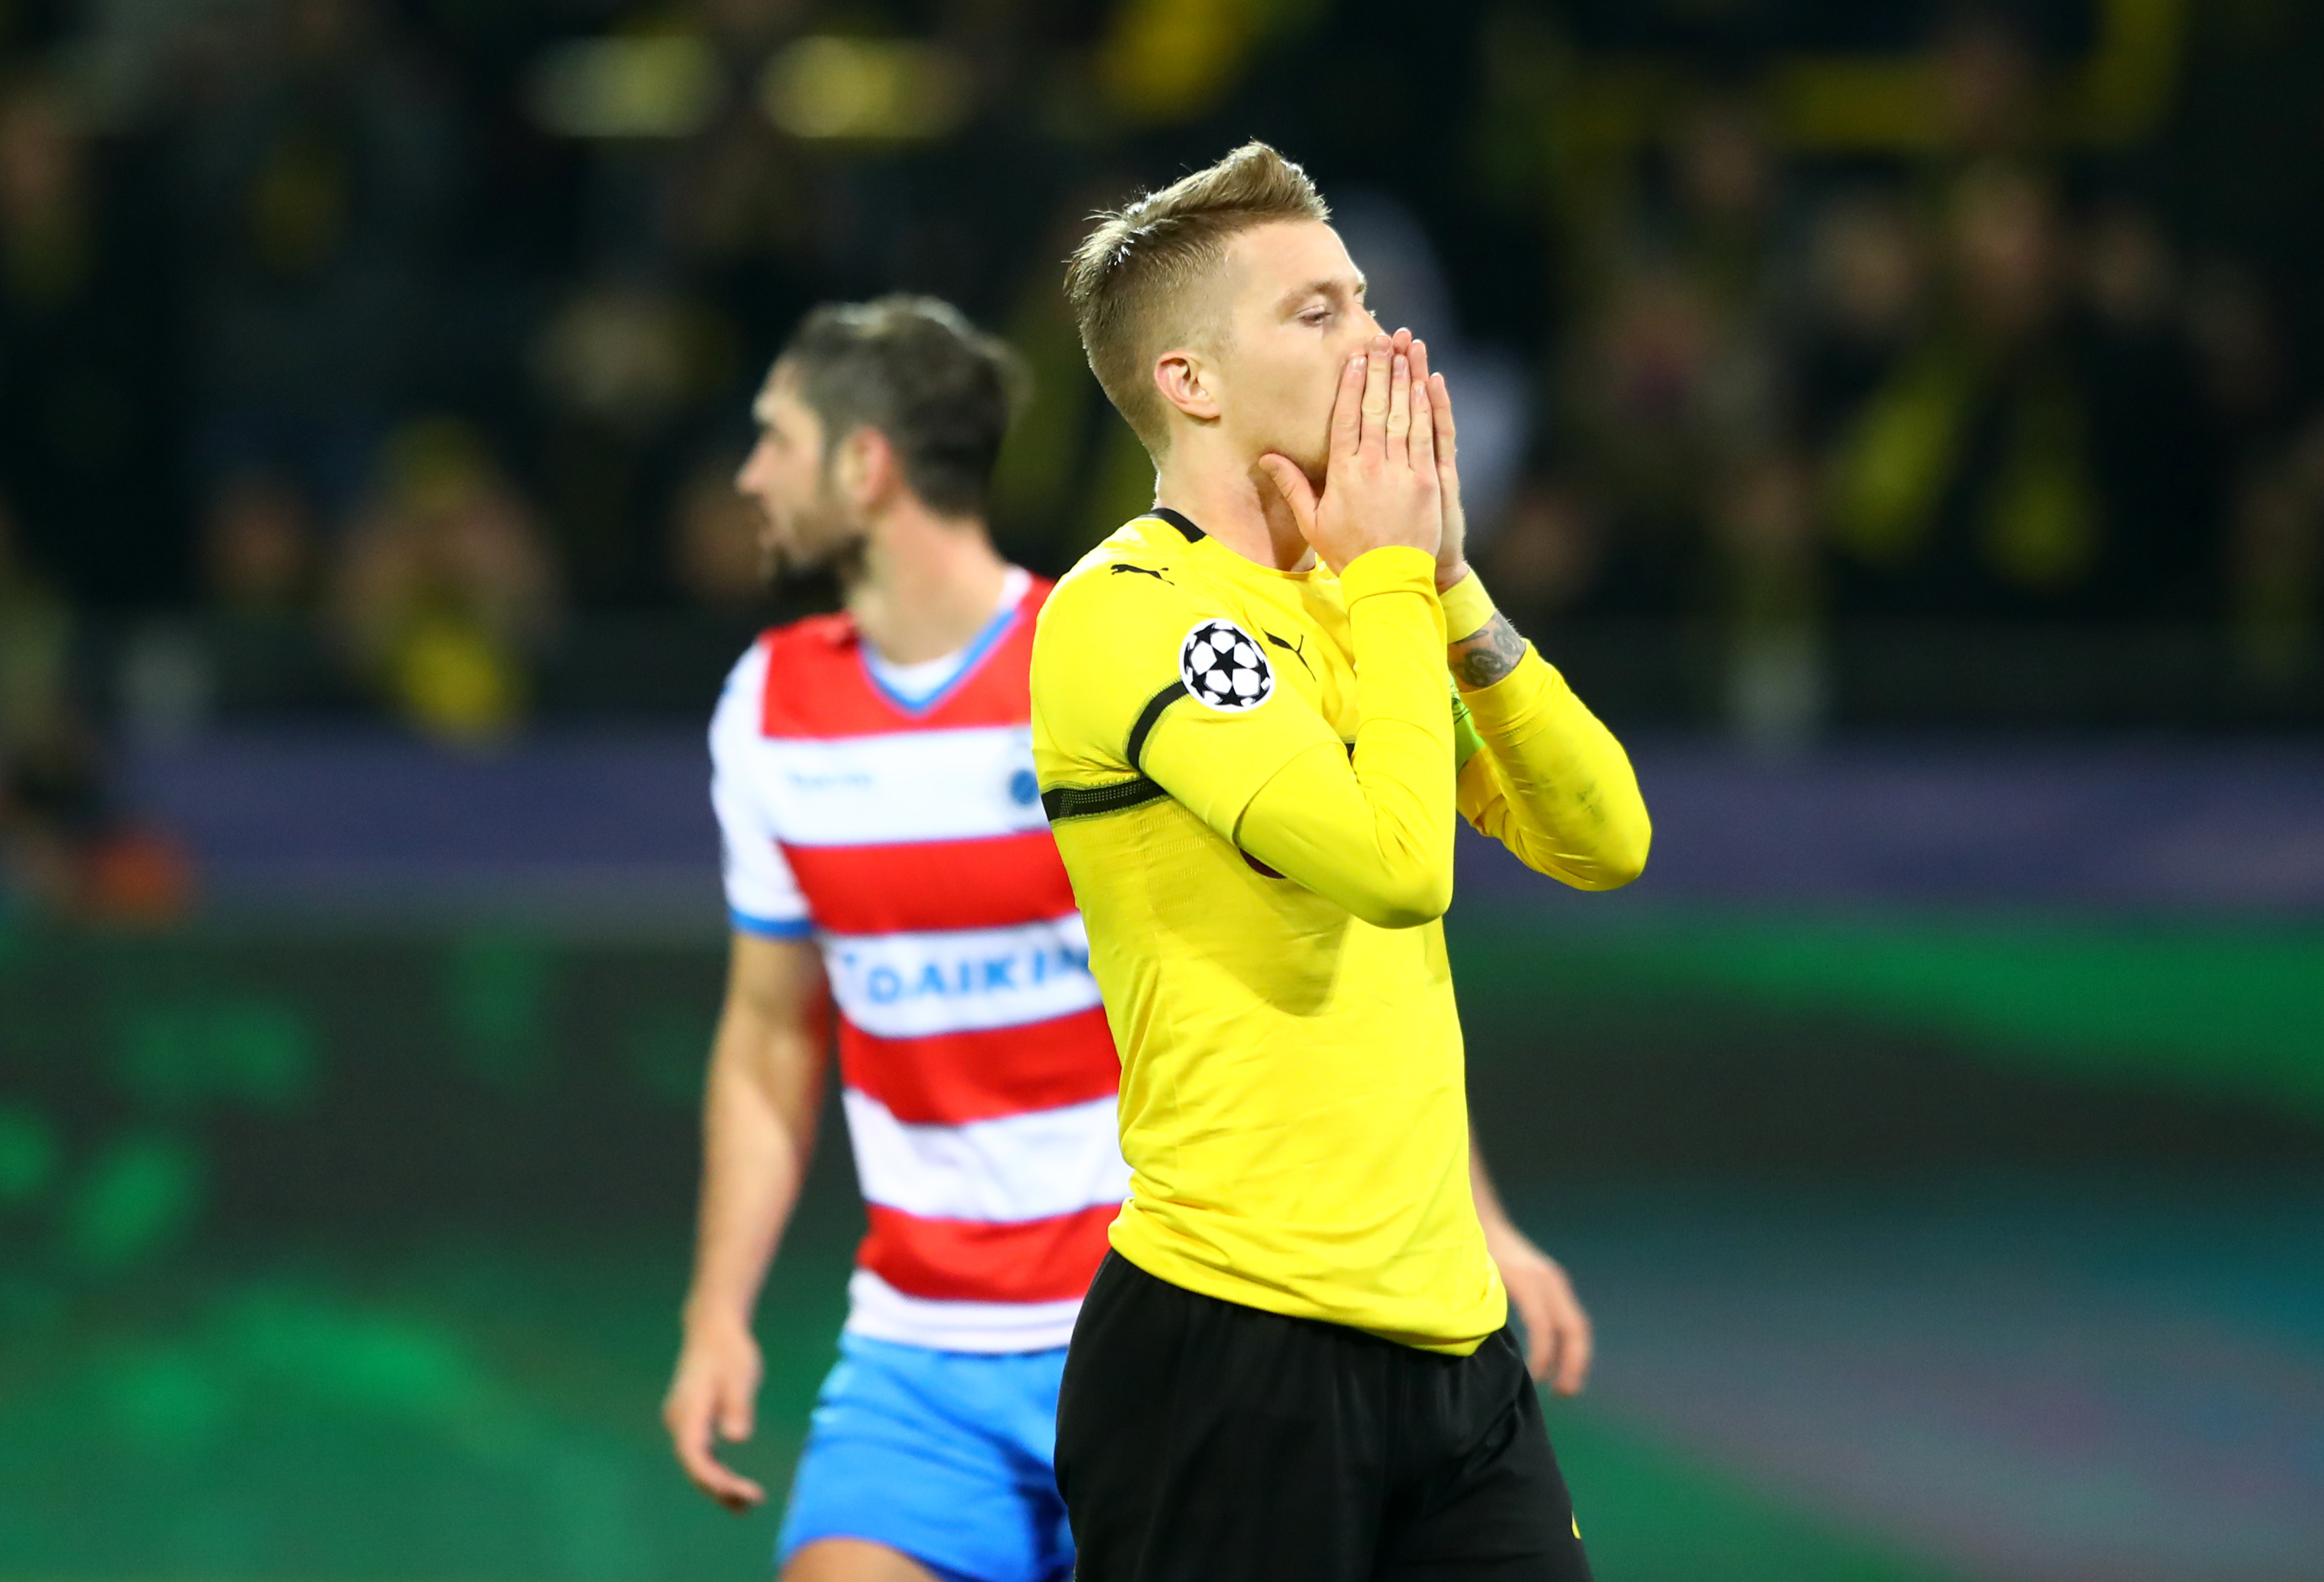 DORTMUND, GERMANY - NOVEMBER 28:  Marco Reus of Borussia Dortmund reacts during the UEFA Champions League Group A match between Borussia Dortmund and Club Brugge at Signal Iduna Park on November 28, 2018 in Dortmund, Germany.  (Photo by Martin Rose/Bongarts/Getty Images,)